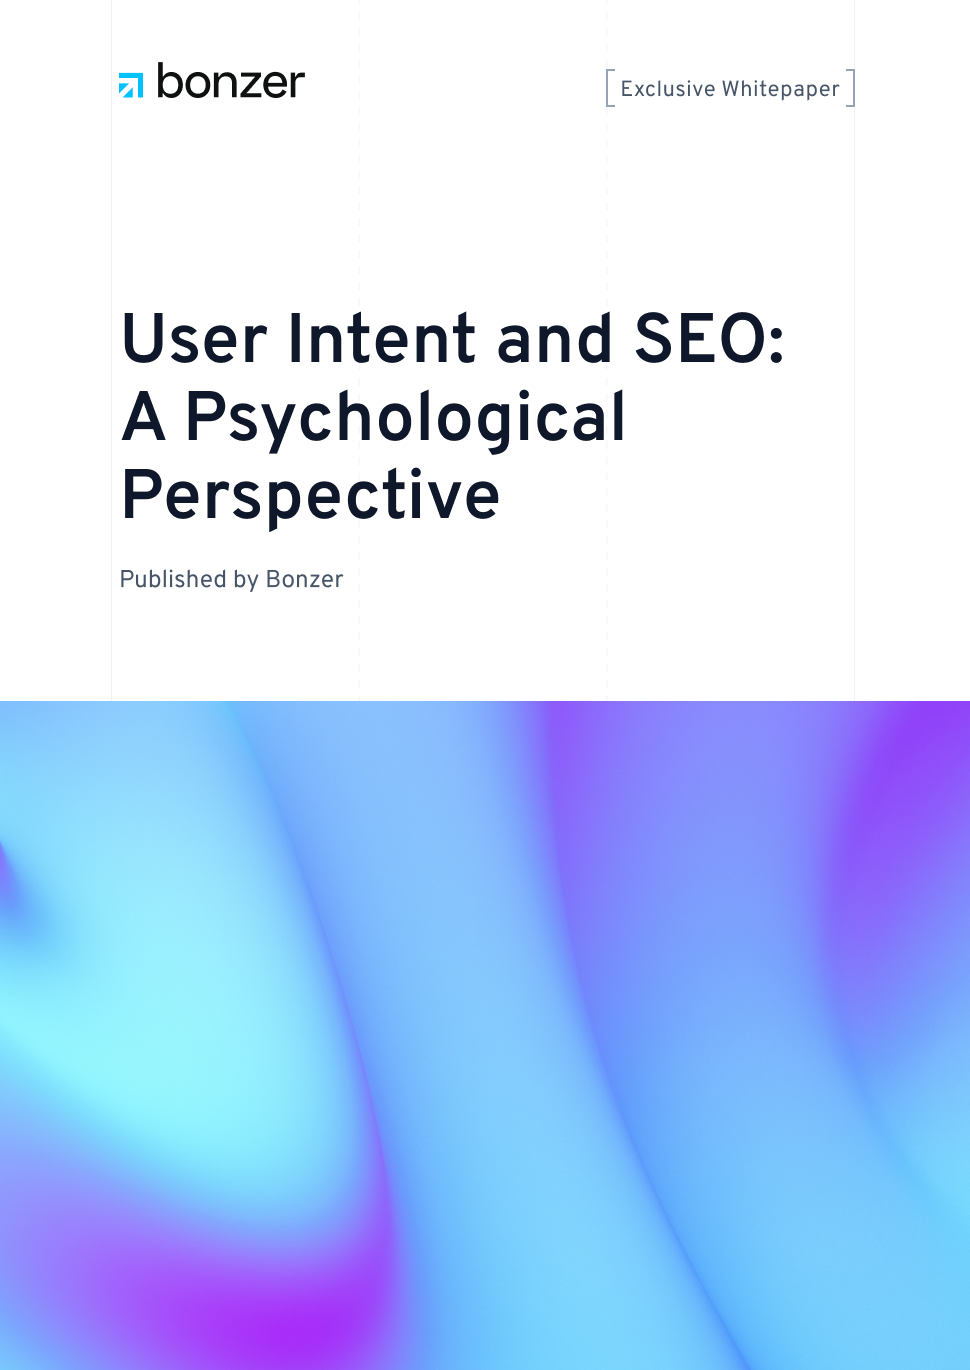 User Intent and SEO: A Psychological Perspective